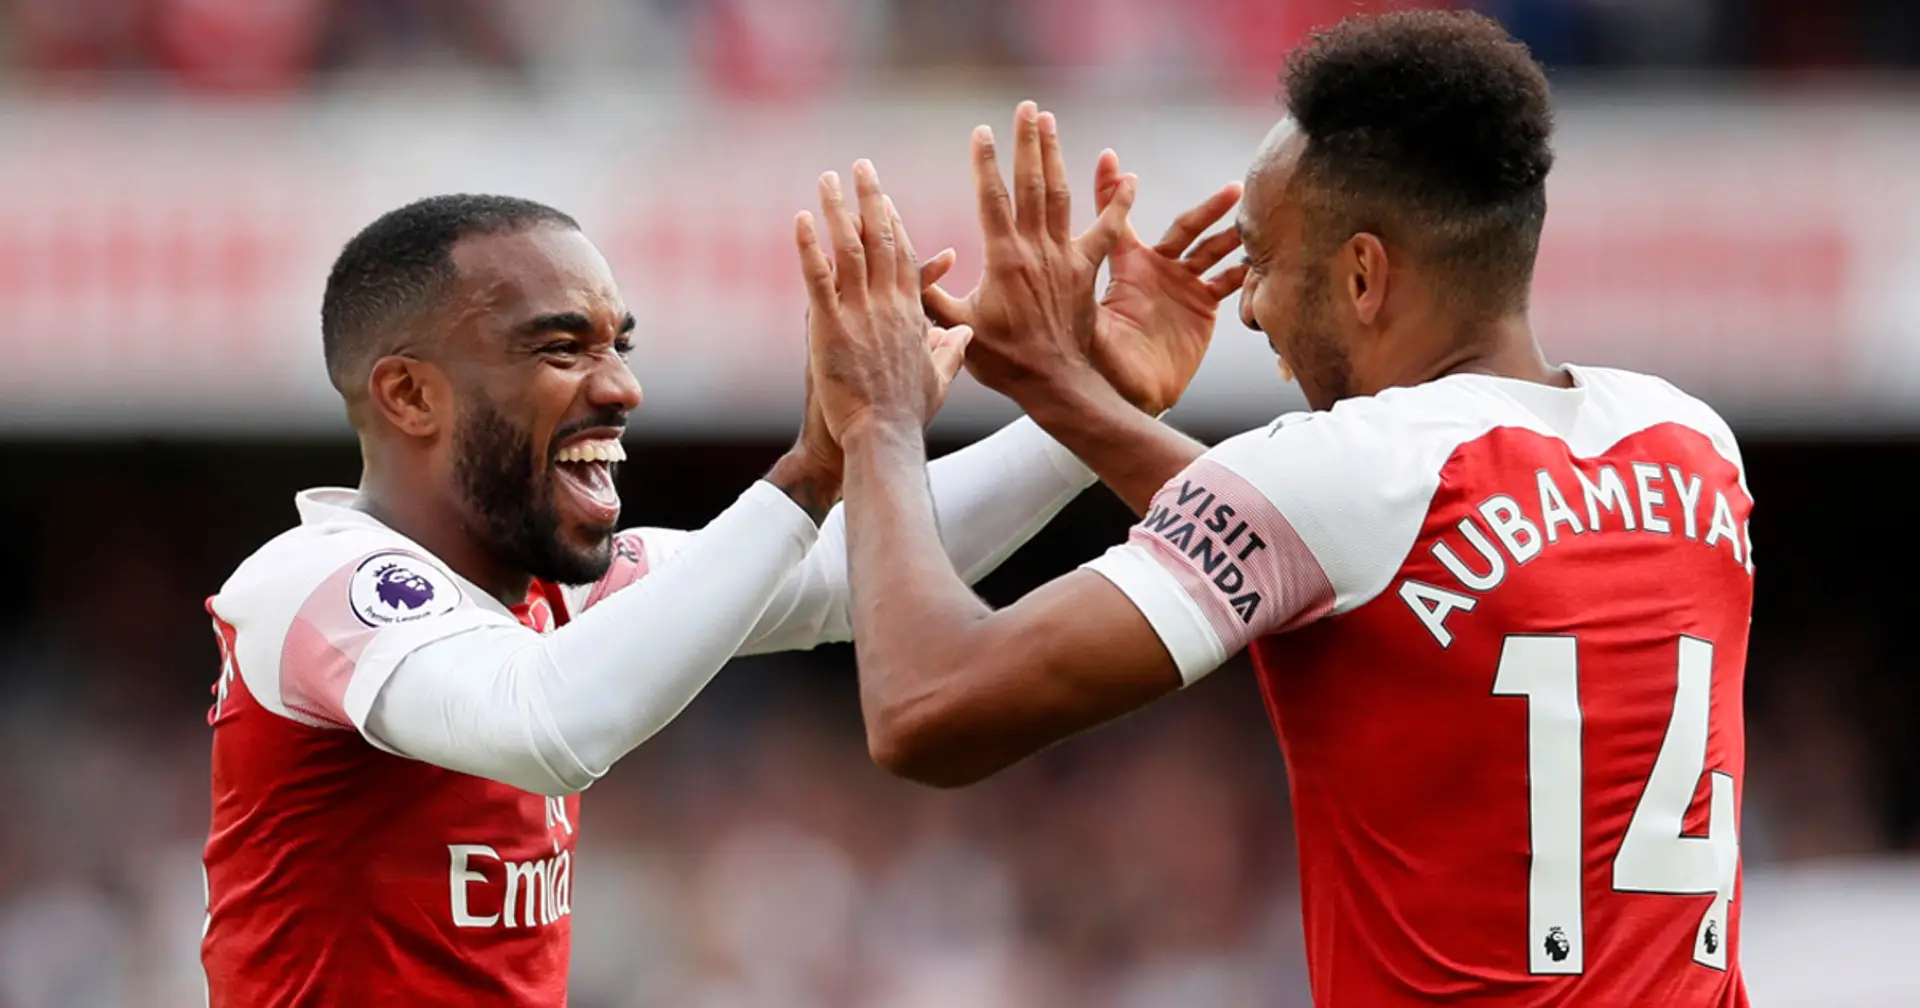 6 goals behind Salah & Mane, 56% of all Arsenal strikes in 19/20: breaking down Auba's & Laca's on-pitch bromance